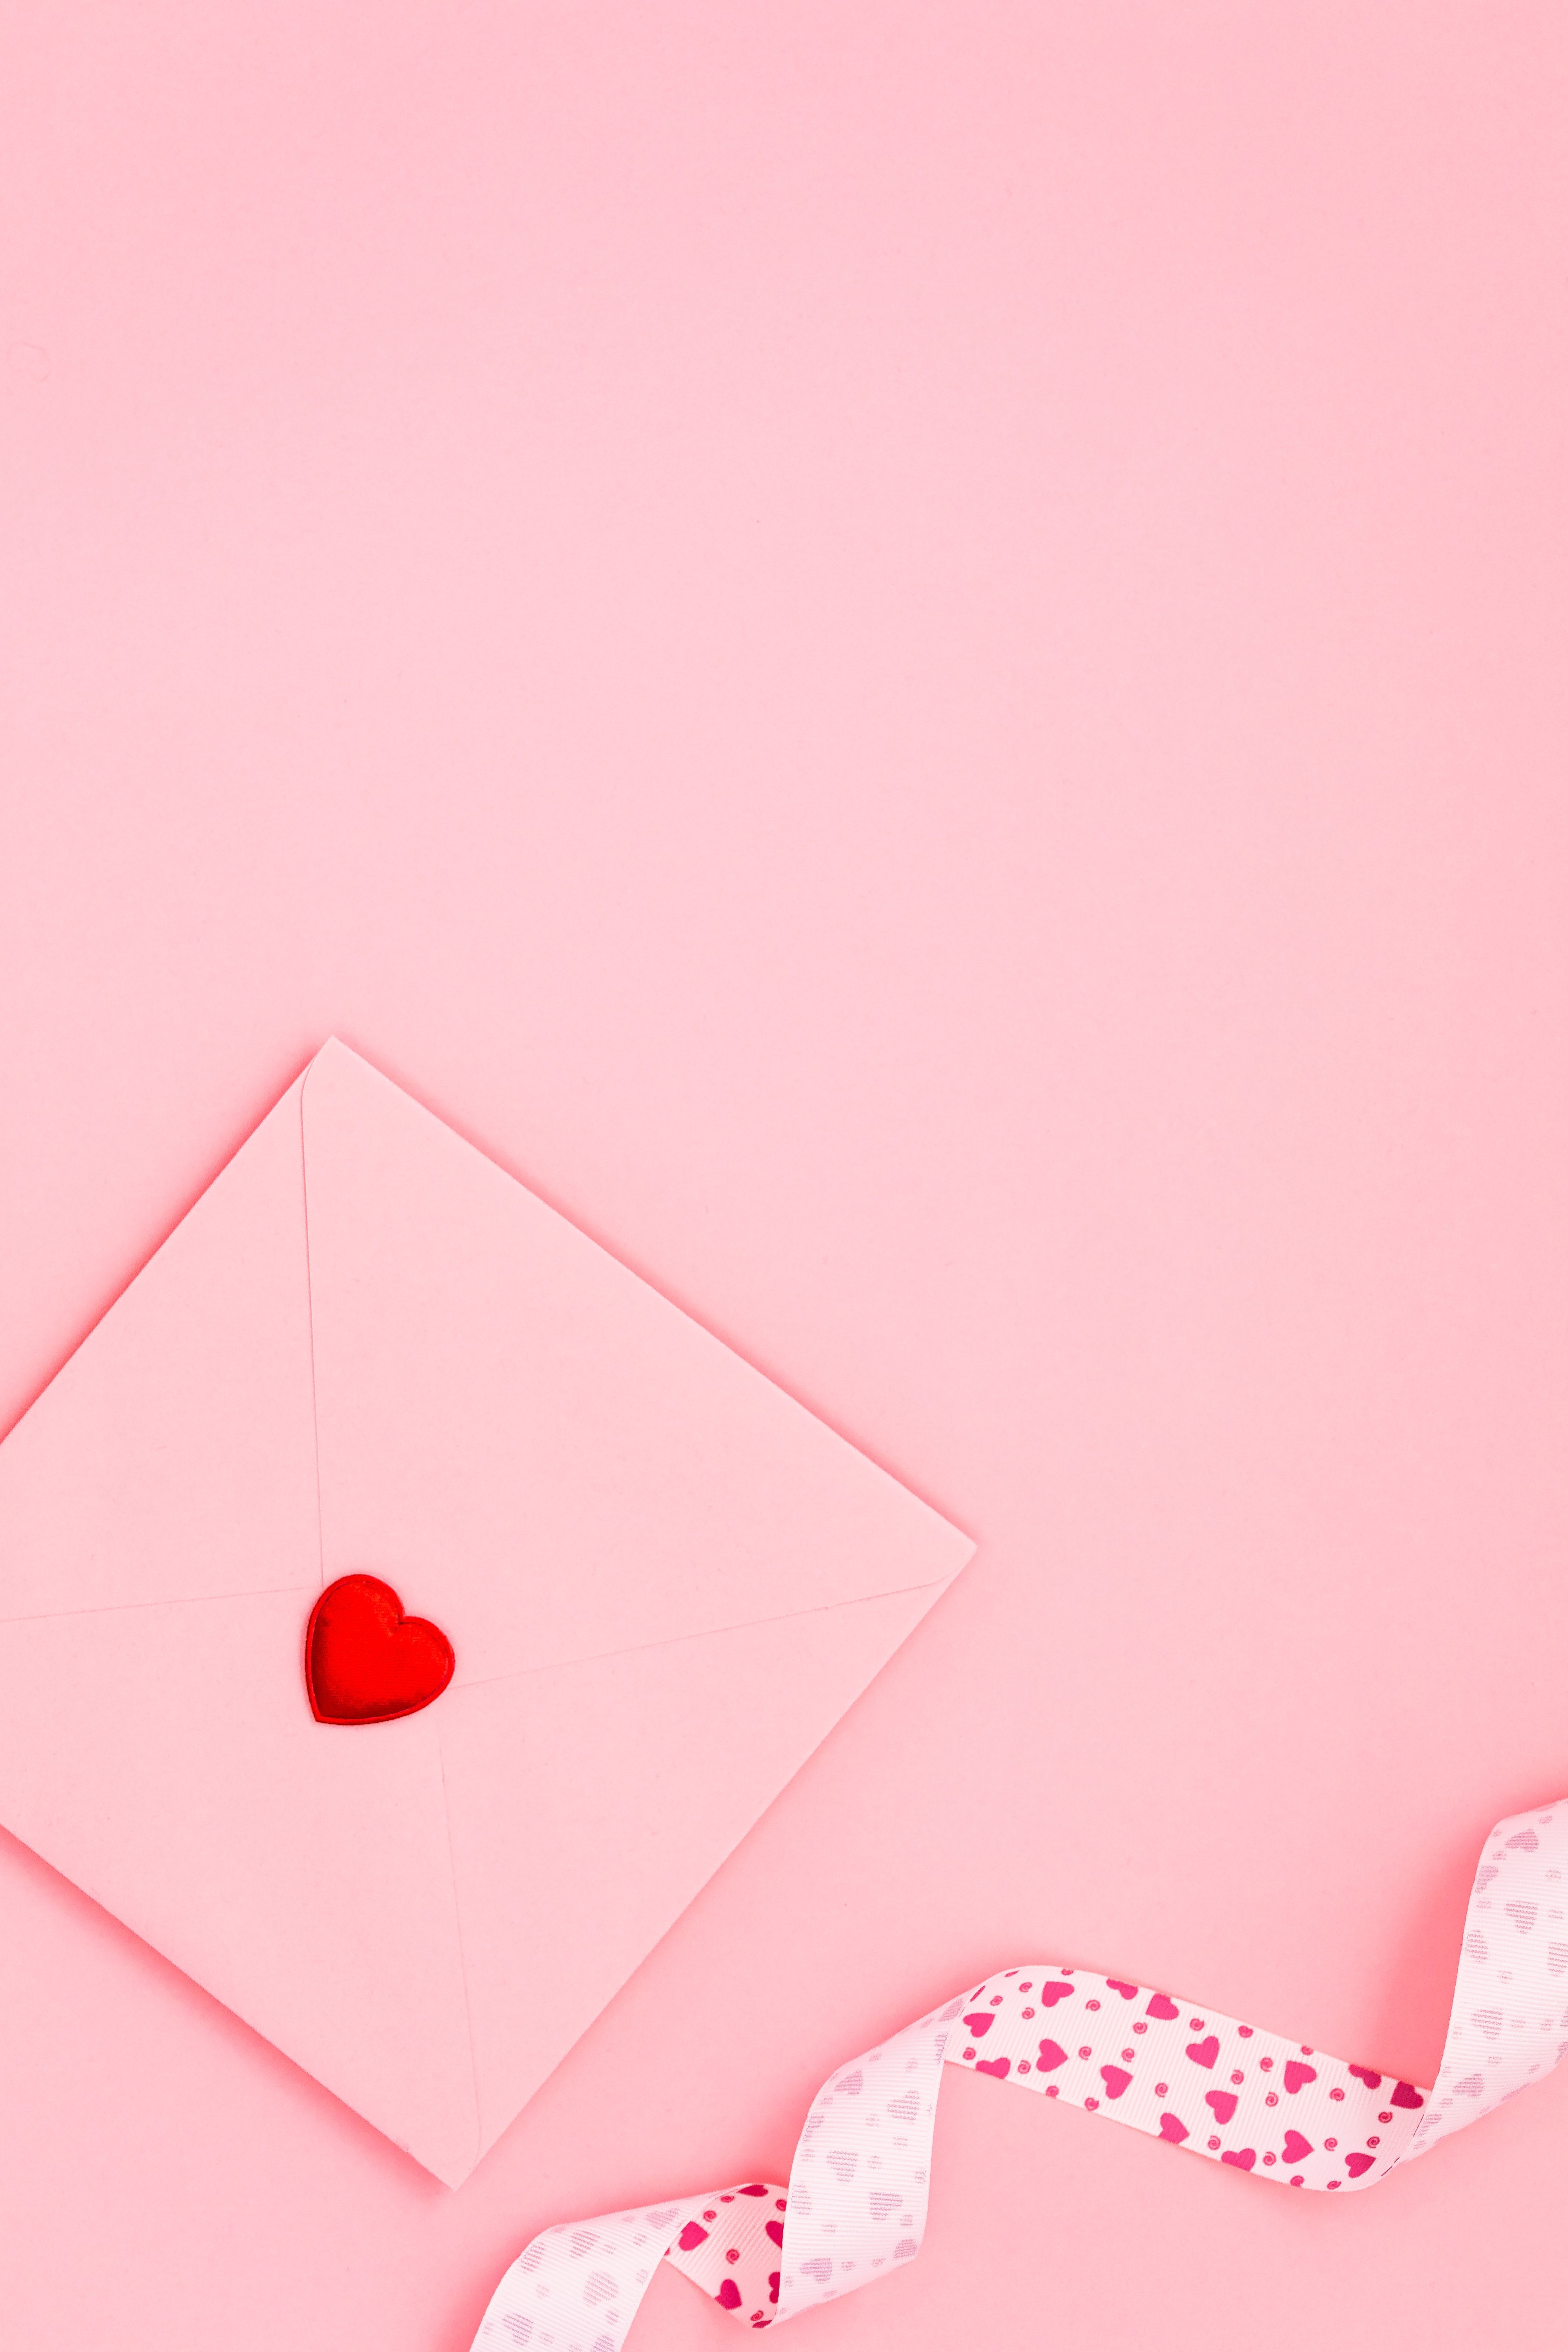 A pink envelope with red heart on it and ribbon - Lovecore